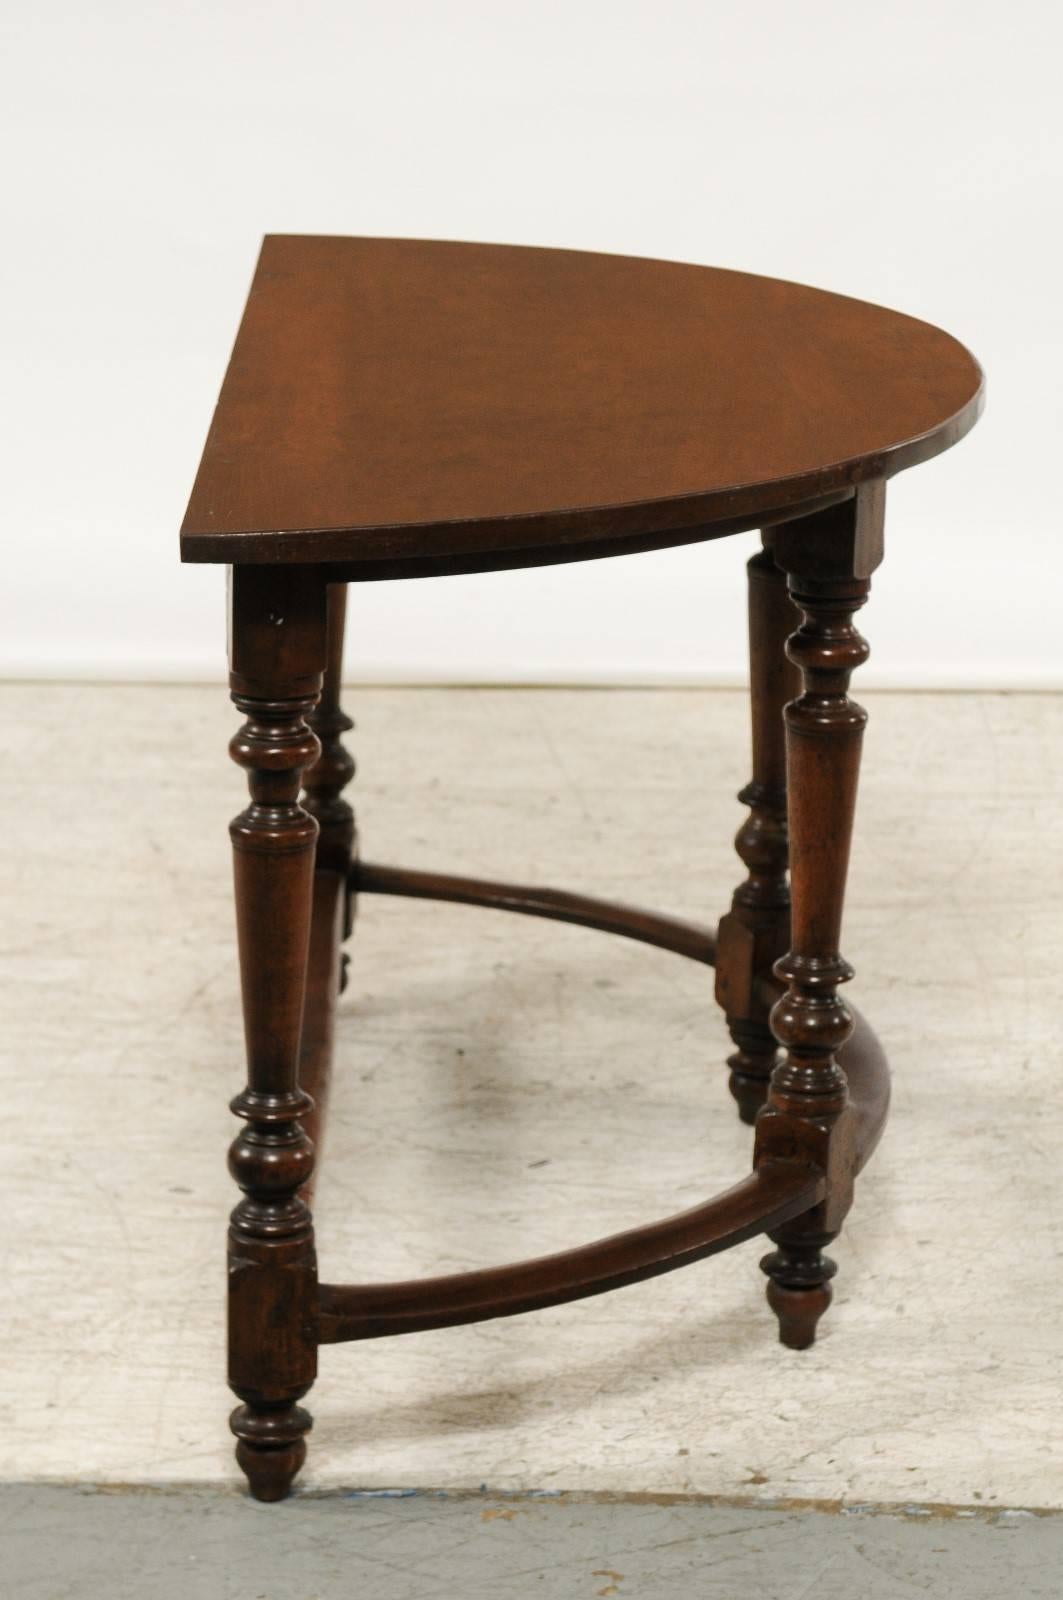 19th Century Pair of Large 1820s Italian Walnut Demilune Console Tables with Turned Legs